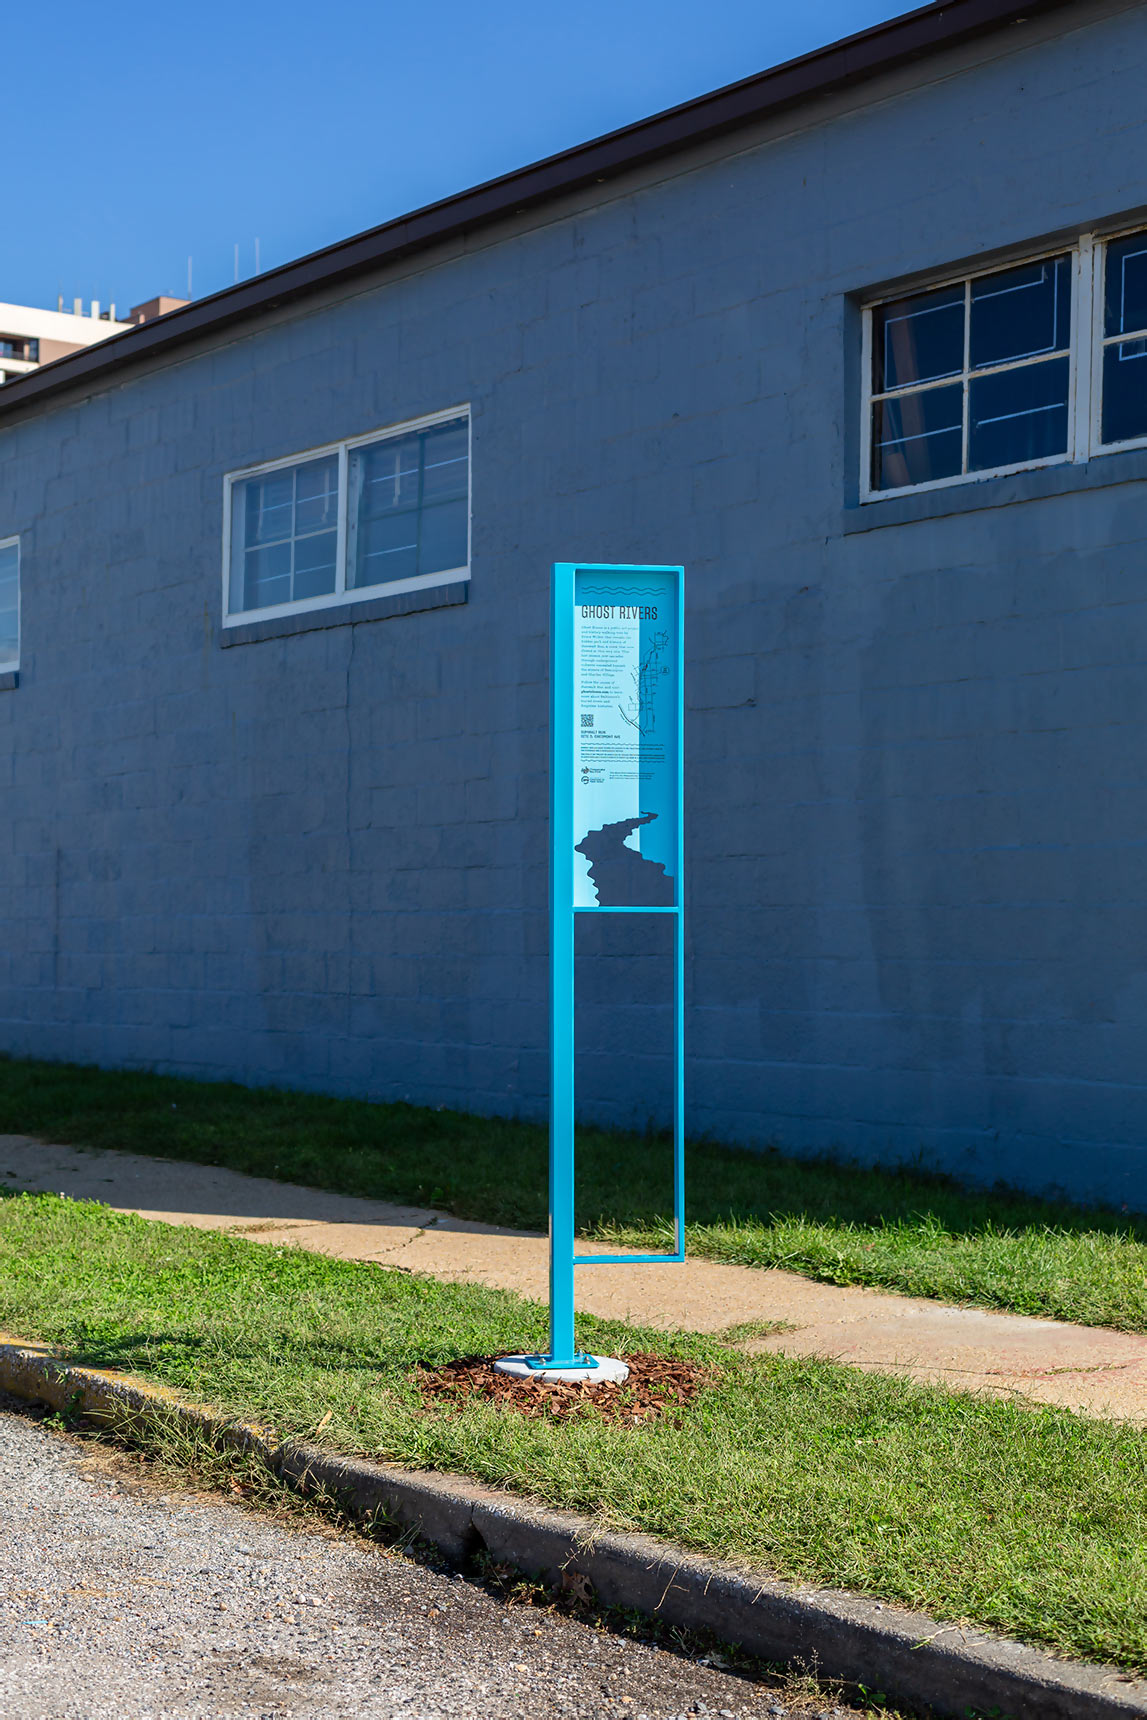 Photo of a public art installation mapping the path of an underground stream onto the pavement, showing a tall blue interpretive sign, standing in a grass strip next to a sidewalk with the form of a river cut out from the bottom of the sign panel.